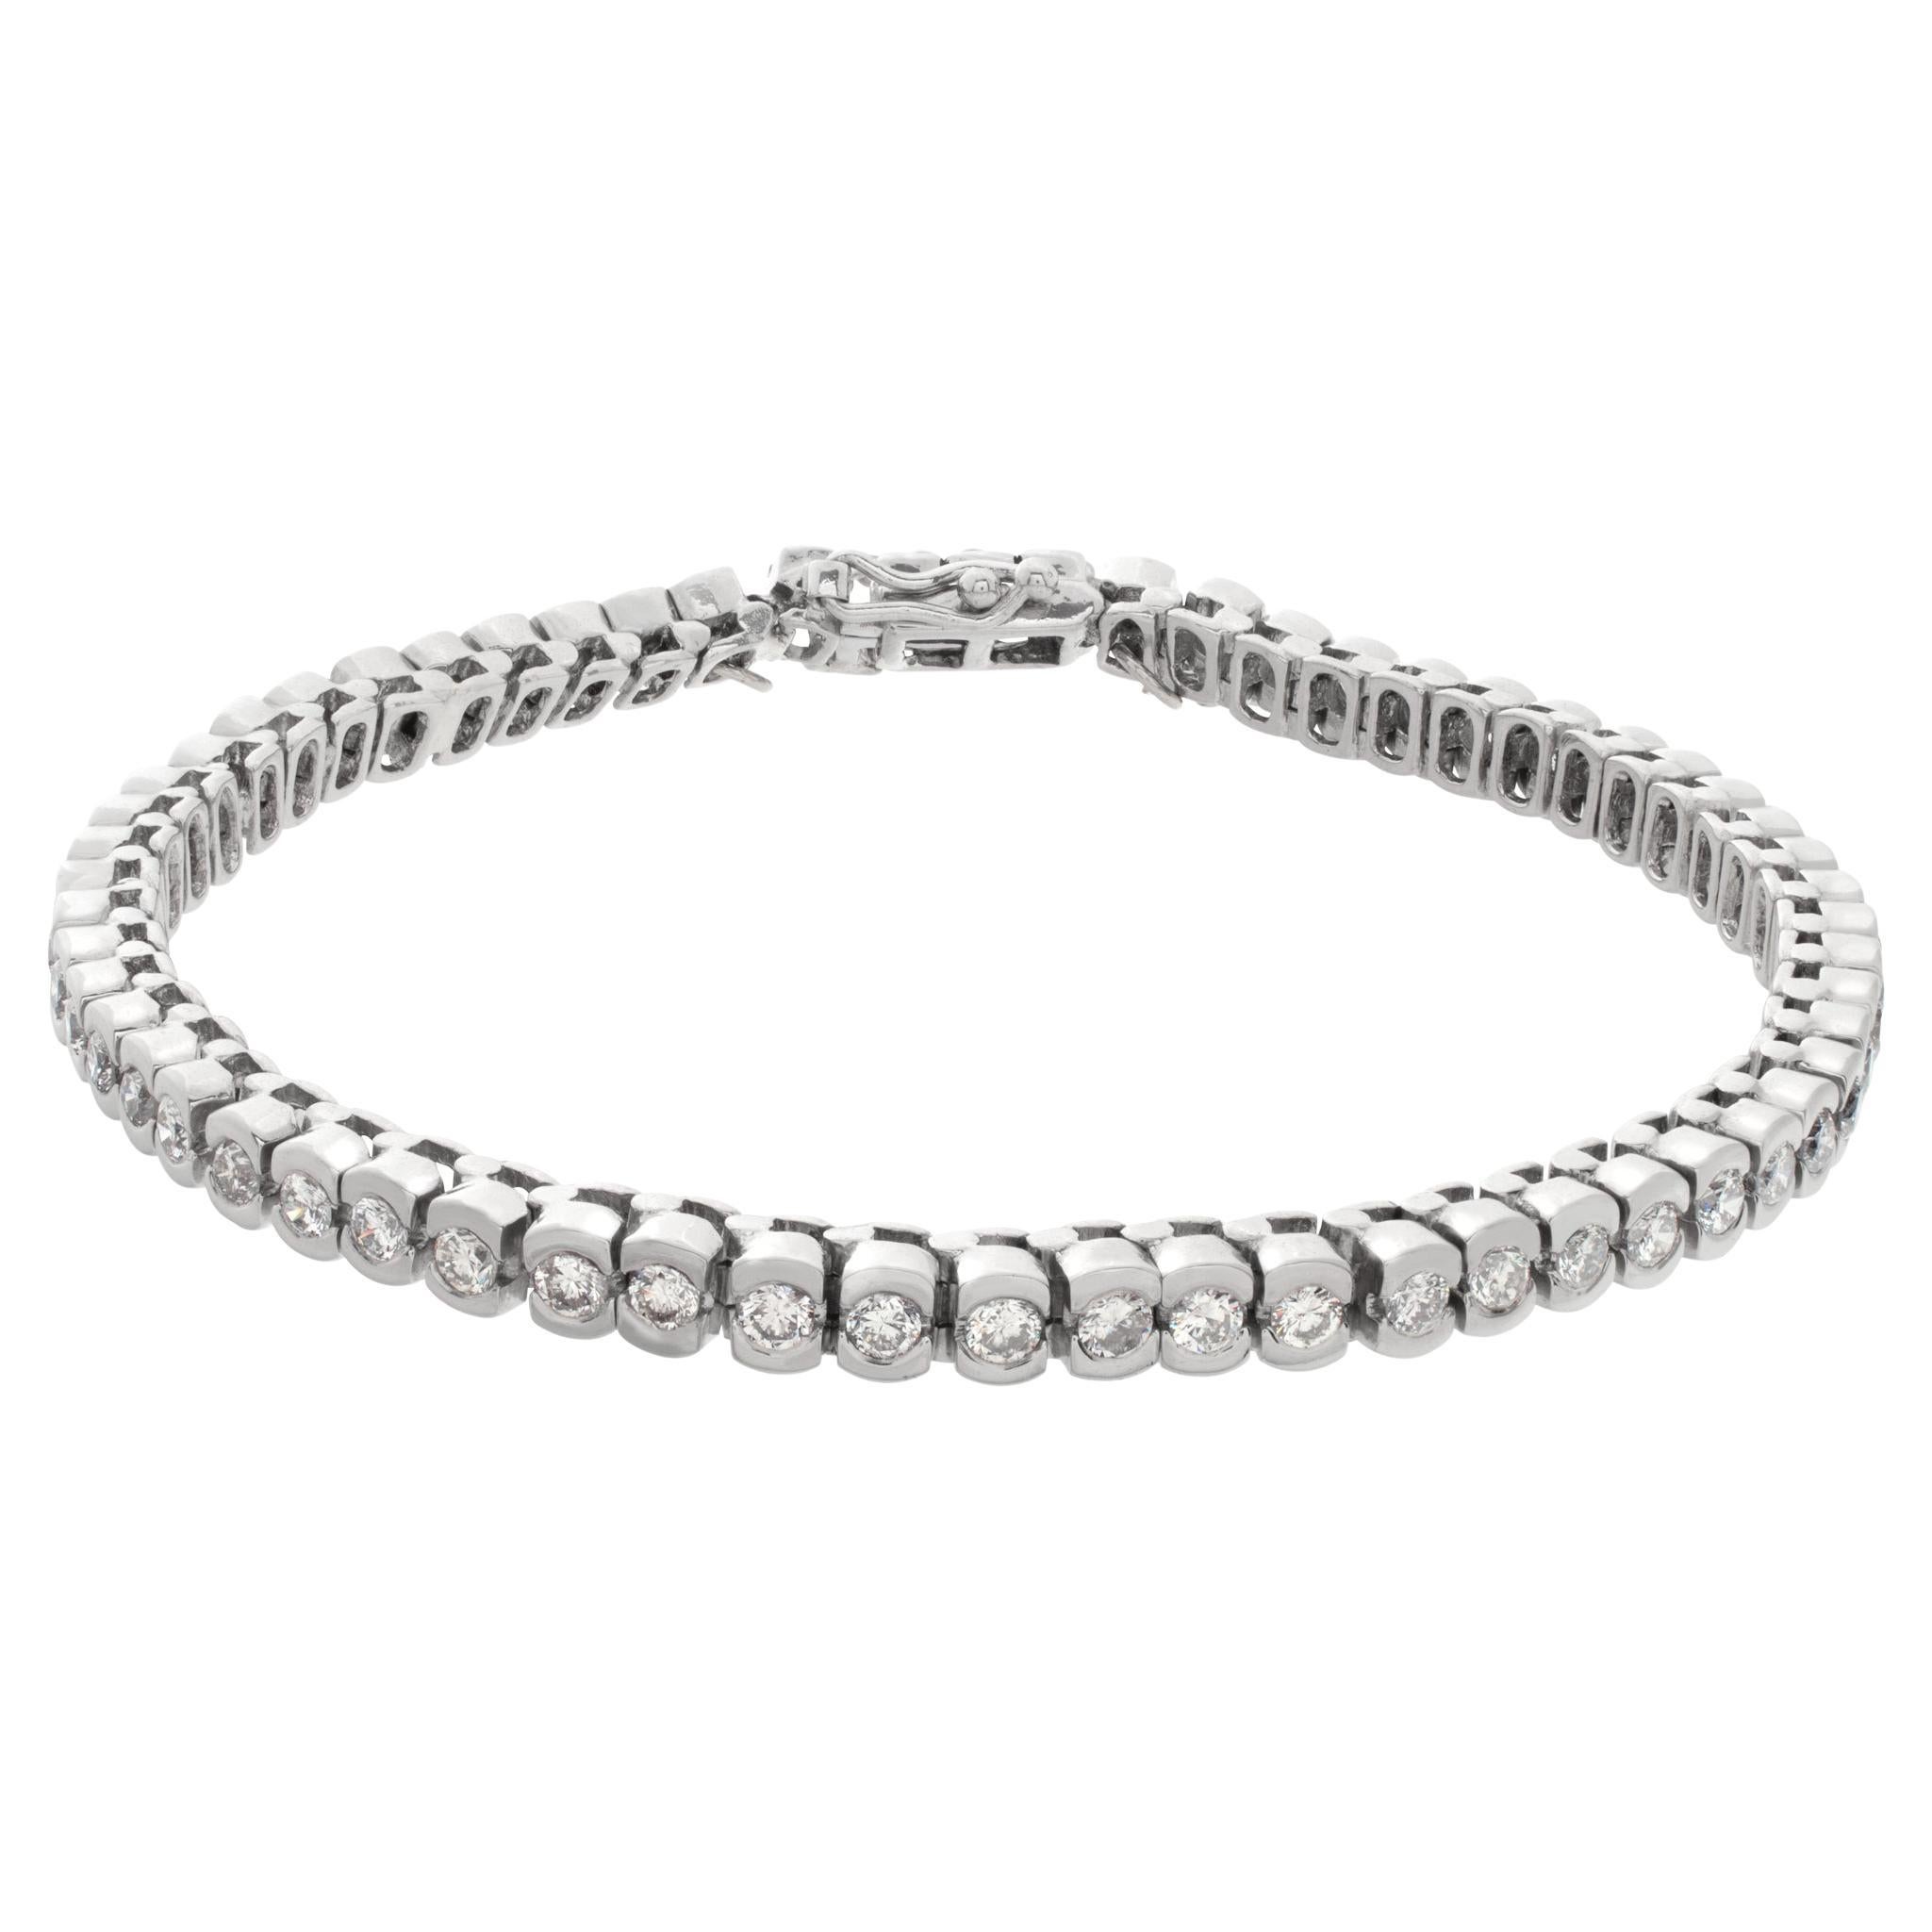 Diamond tennis bracelet in platinum with approximately 6 carats in round diamond